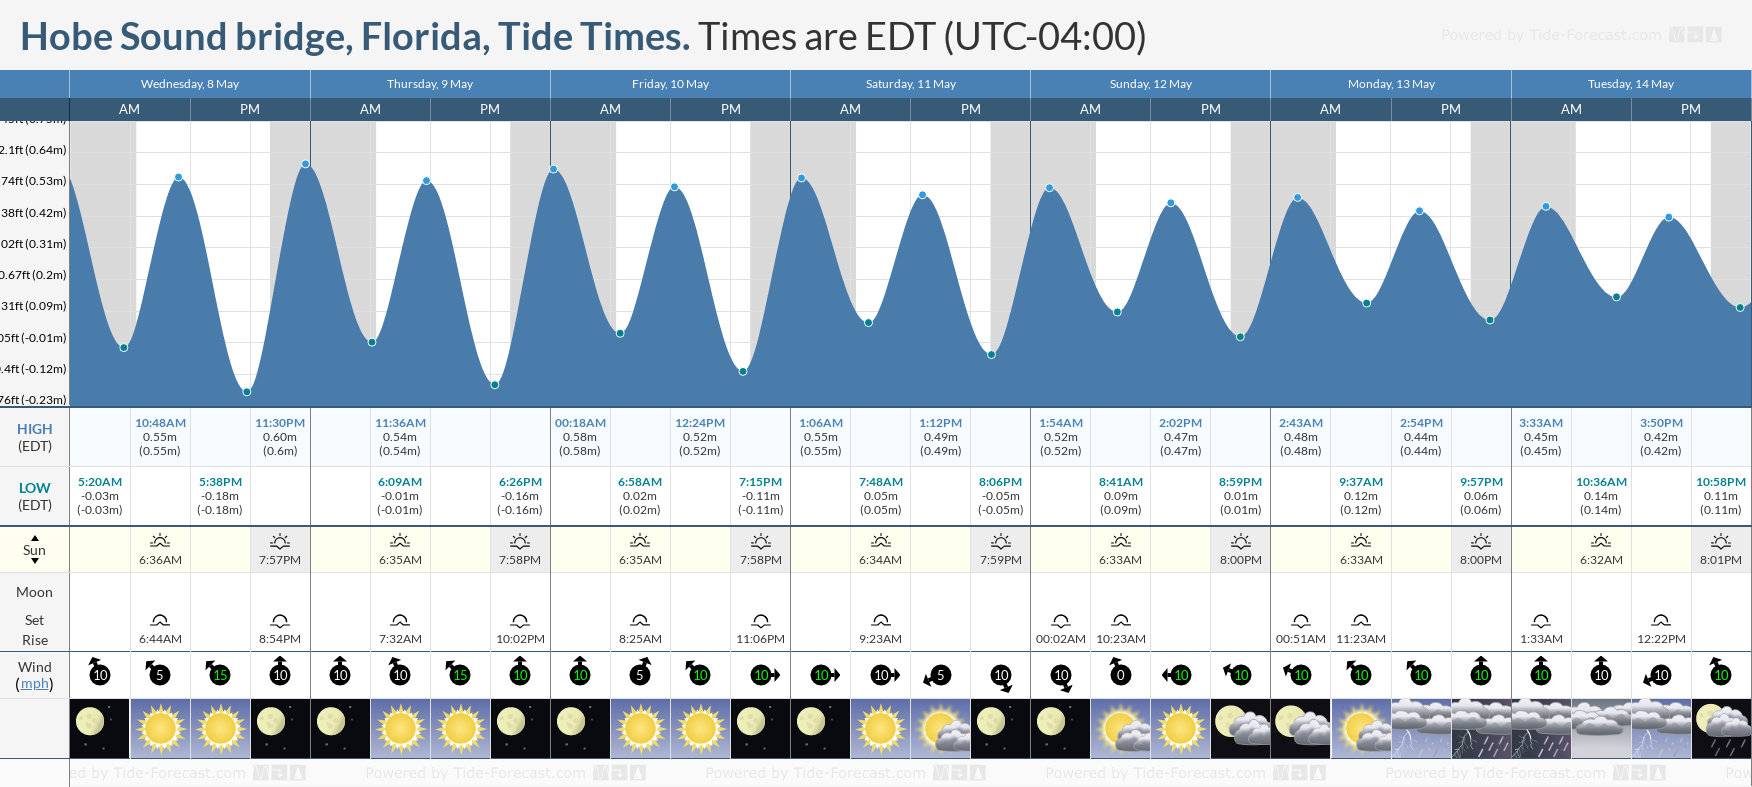 Hobe Sound bridge, Florida Tide Chart including high and low tide tide times for the next 7 days